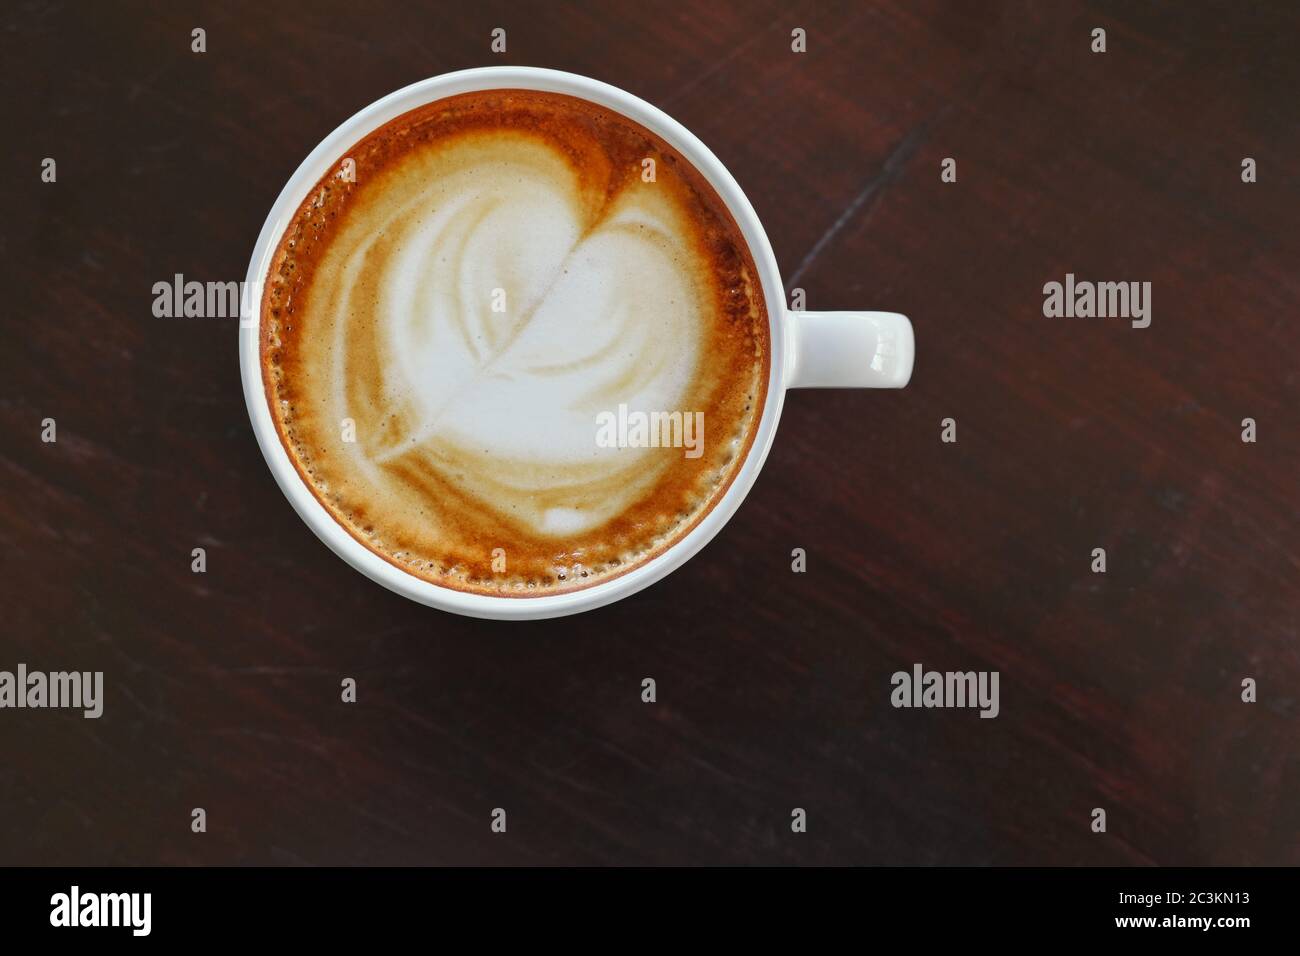 hot coffee cappuccino or latte coffee top view woodwn table with clipping path on cup of coffee Stock Photo